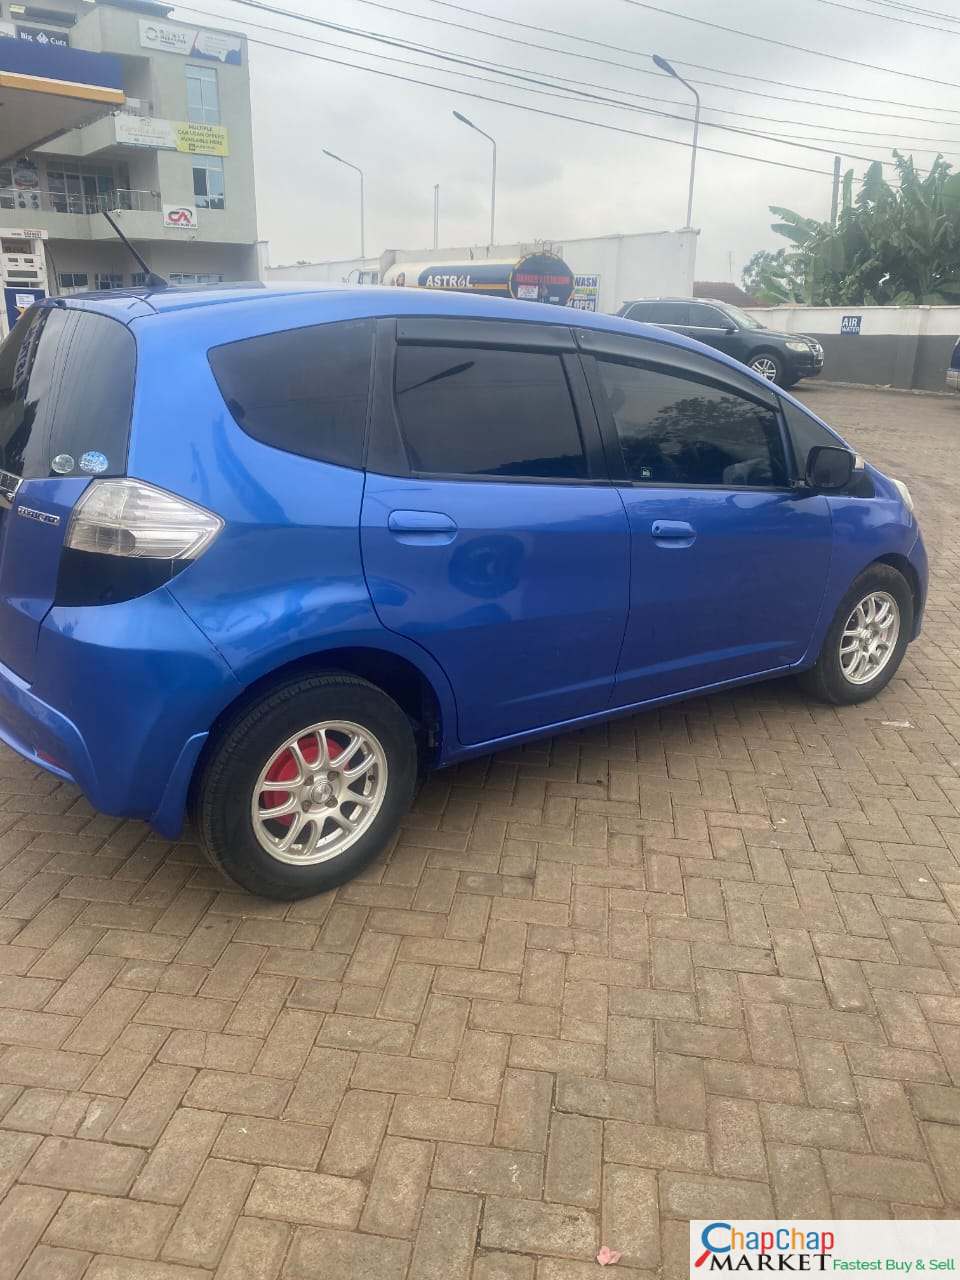 Honda fit hybrid for sale in Kenya You Pay 30% Deposit Trade in OK hire purchase installments EXCLUSIVELY ðŸ”¥